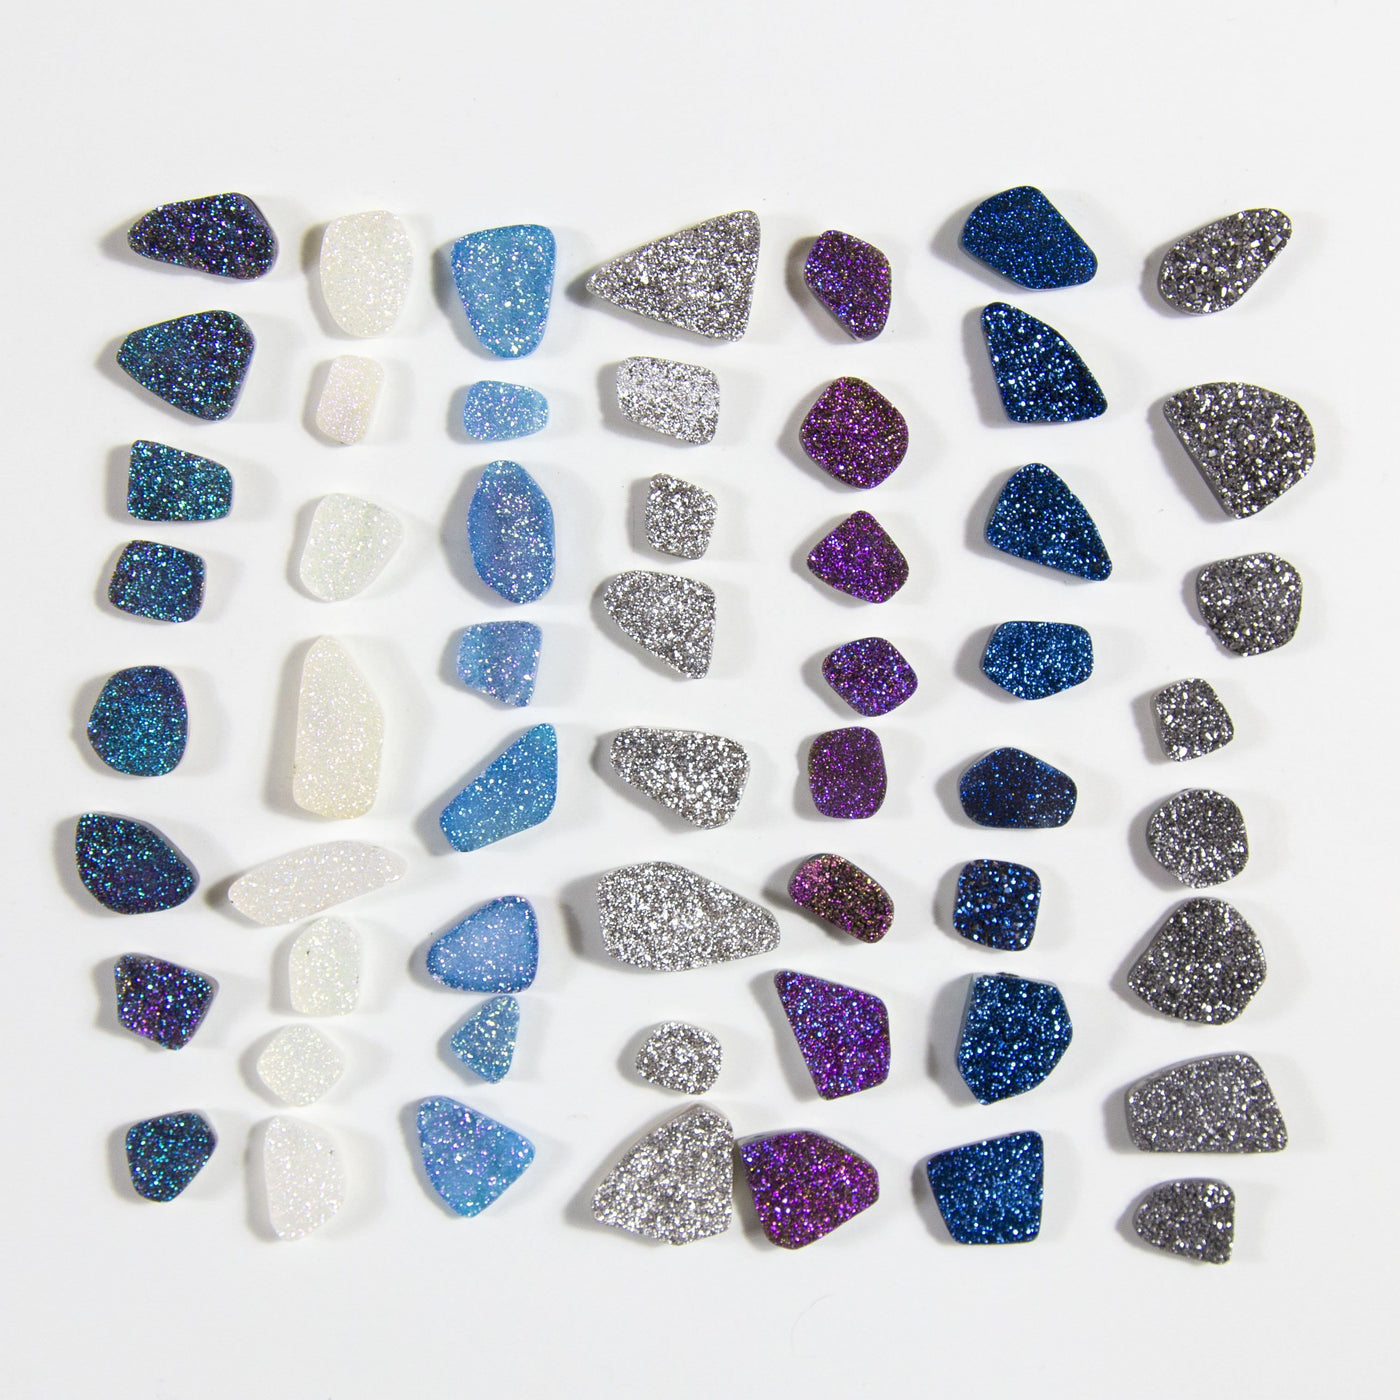 multiple freeform Titanium Druzy Drilled Beads displayed on white background to show they come in rainbow white teal platinum purple mystic blue dark gray